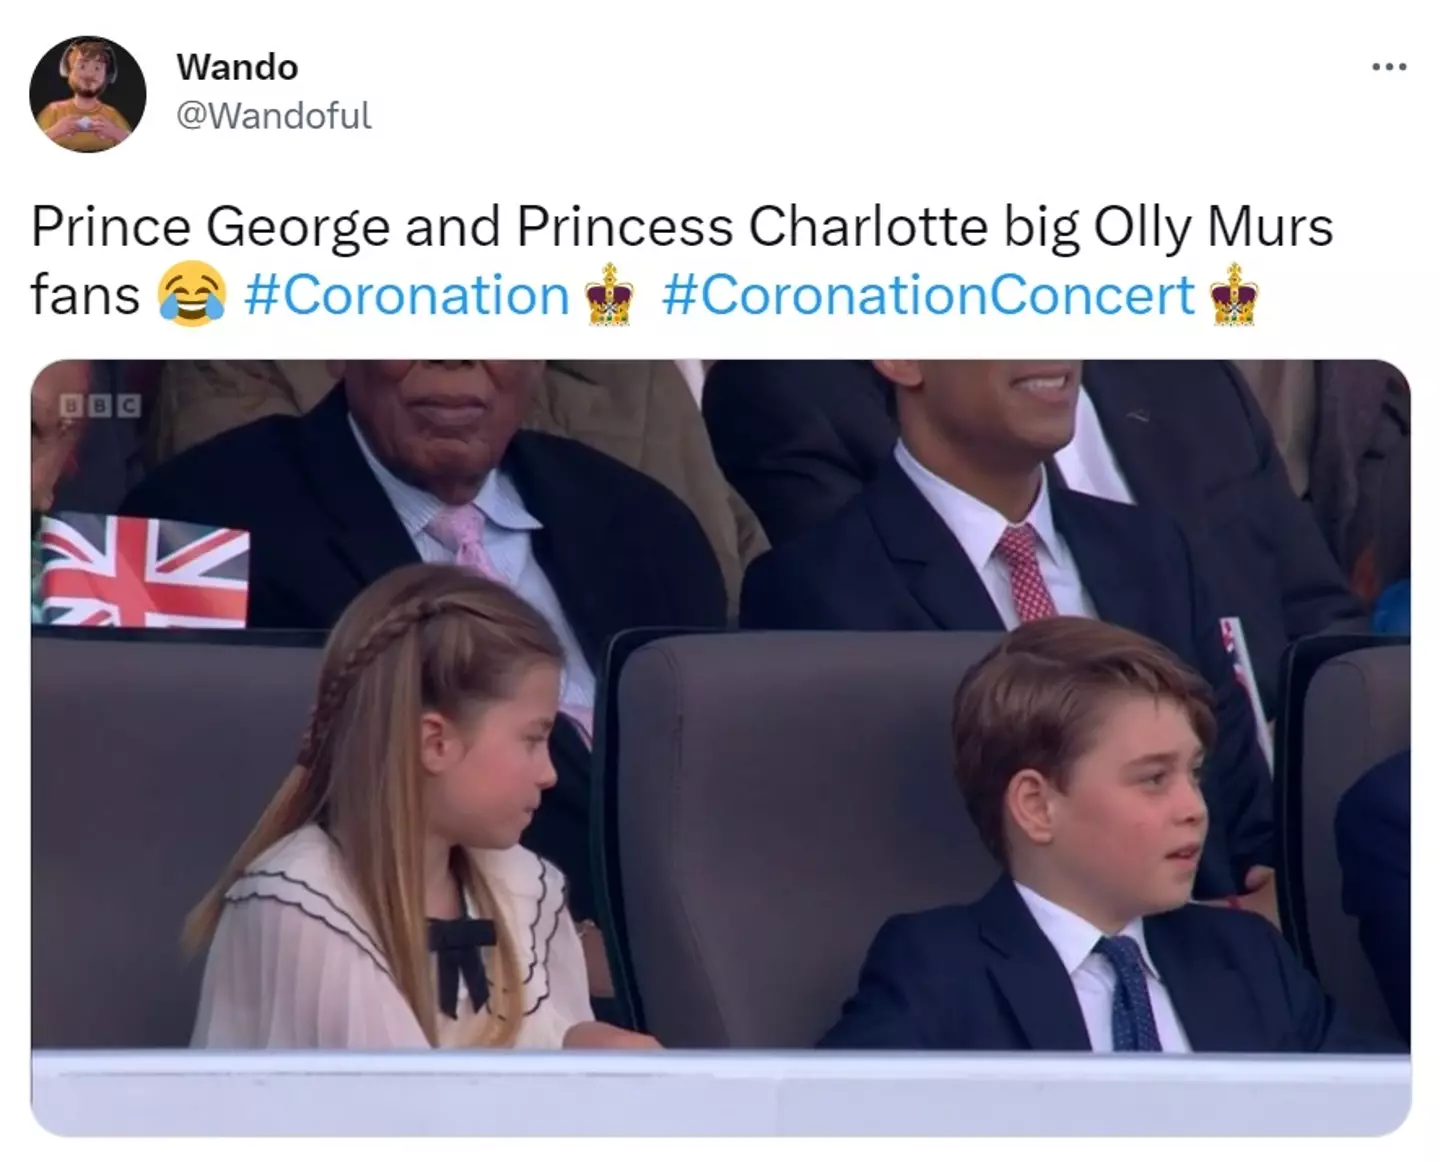 Some viewers thought the younger royals weren't too into Olly Murs.